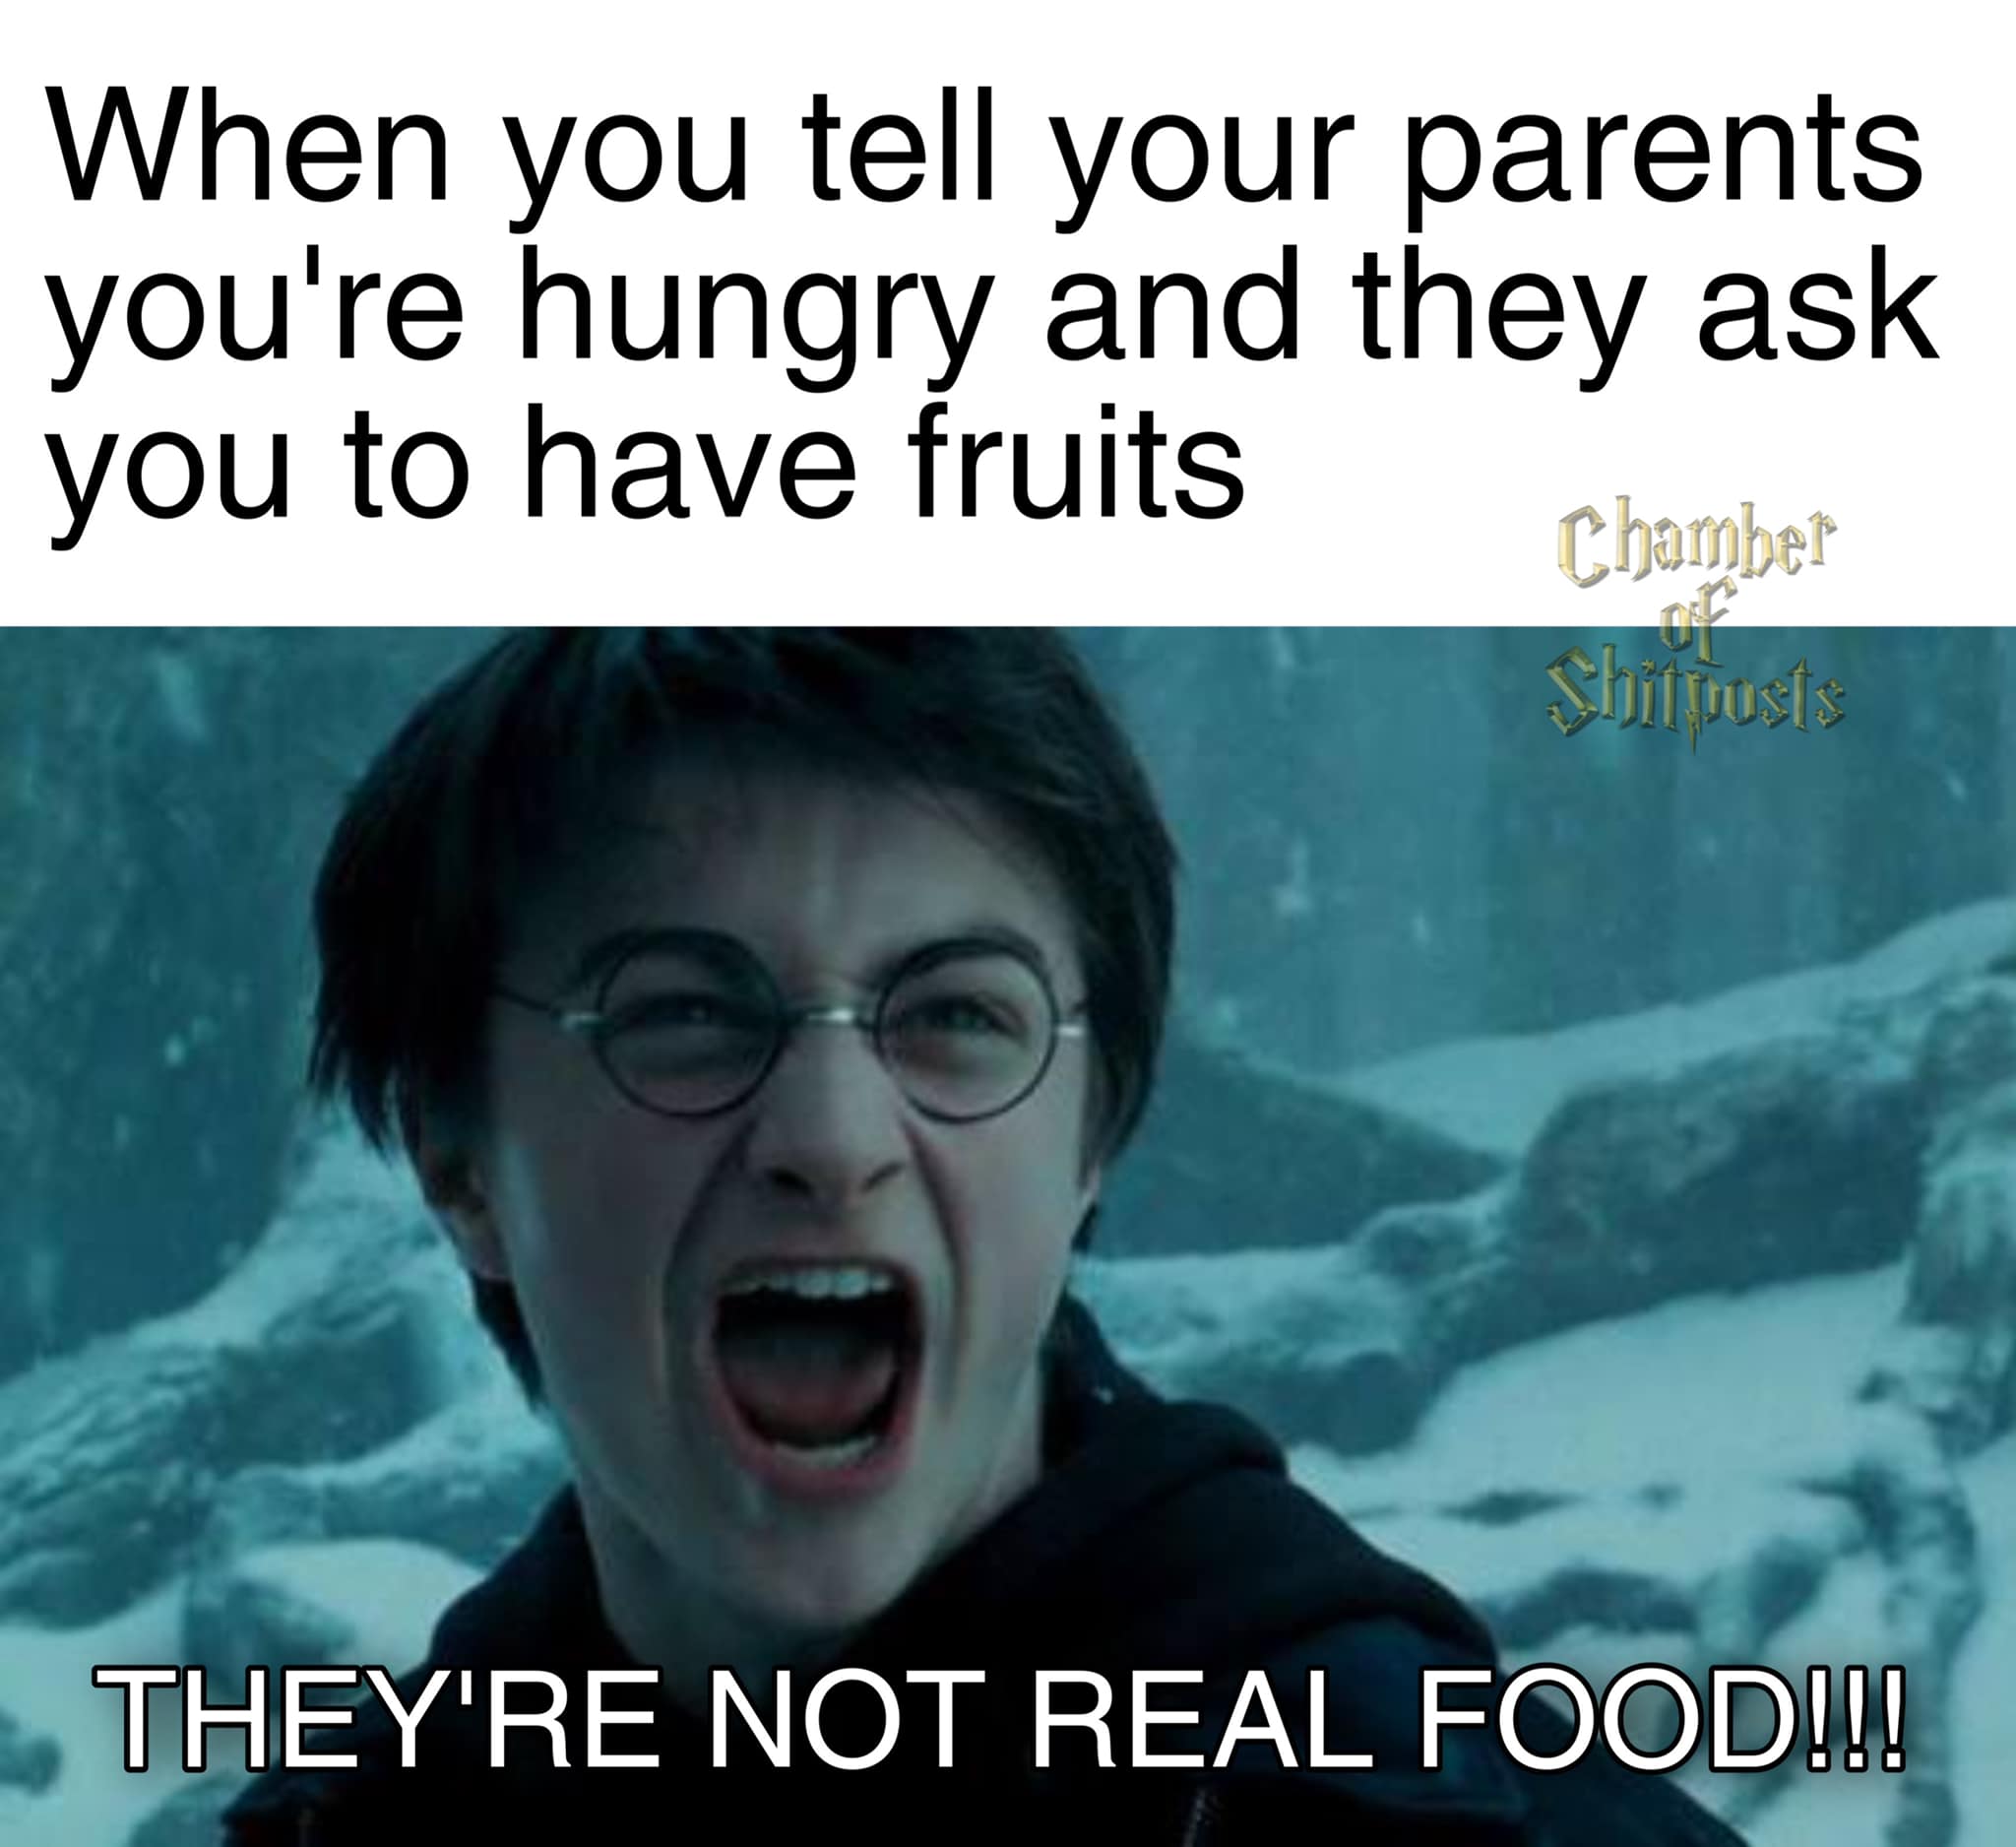 Harry Potter memes - harry potter - When you tell your parents you're hungry and they ask you to have fruits Chamber Of Shitpusts They'Re Not Real Food!!!